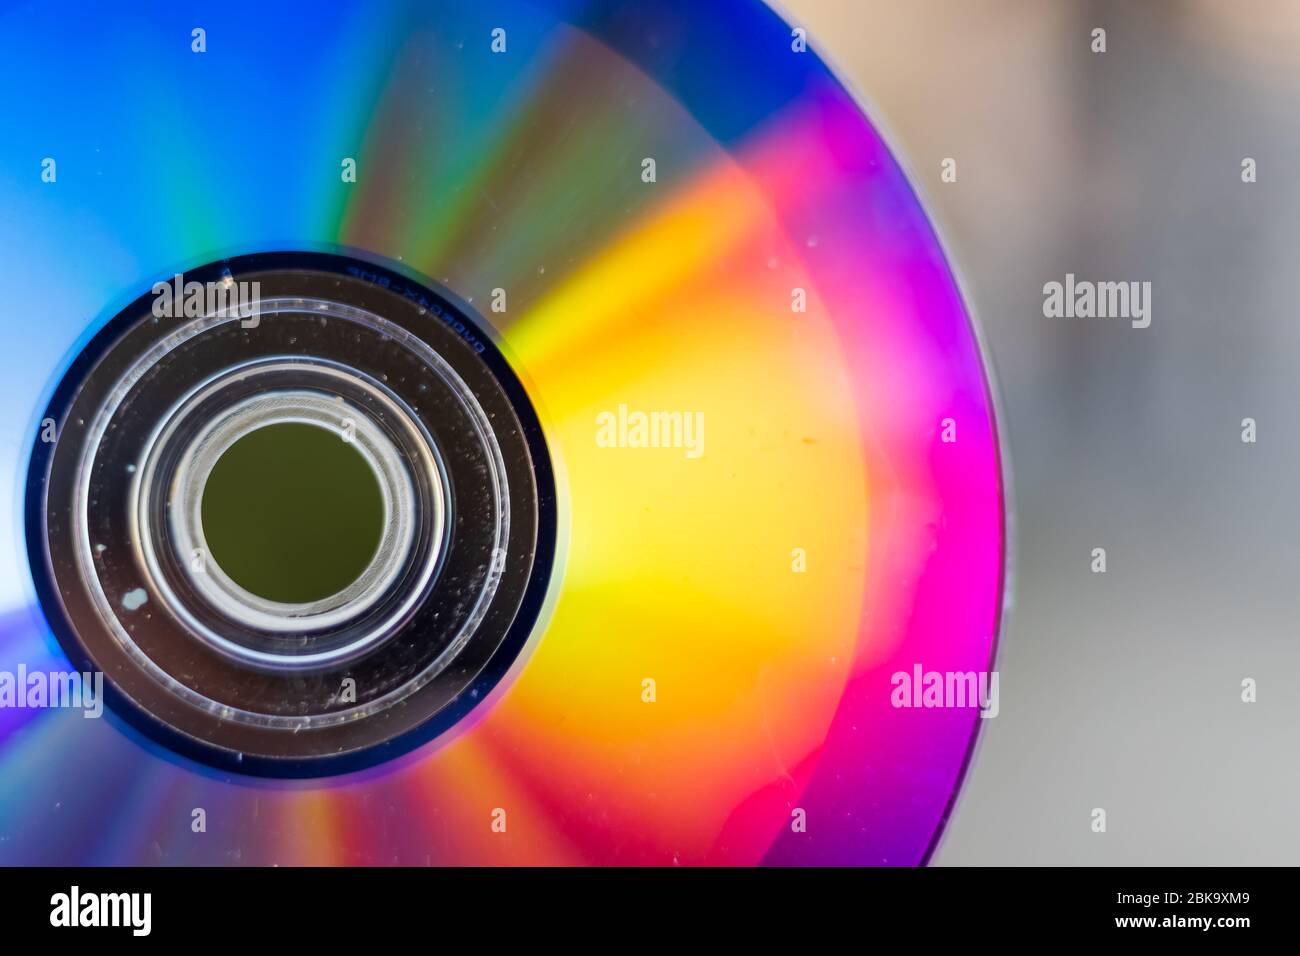 Compact Disc. Holding a CD in hands. The back side of the CD reflects colorful lights. Rainbow colors. Stock Photo